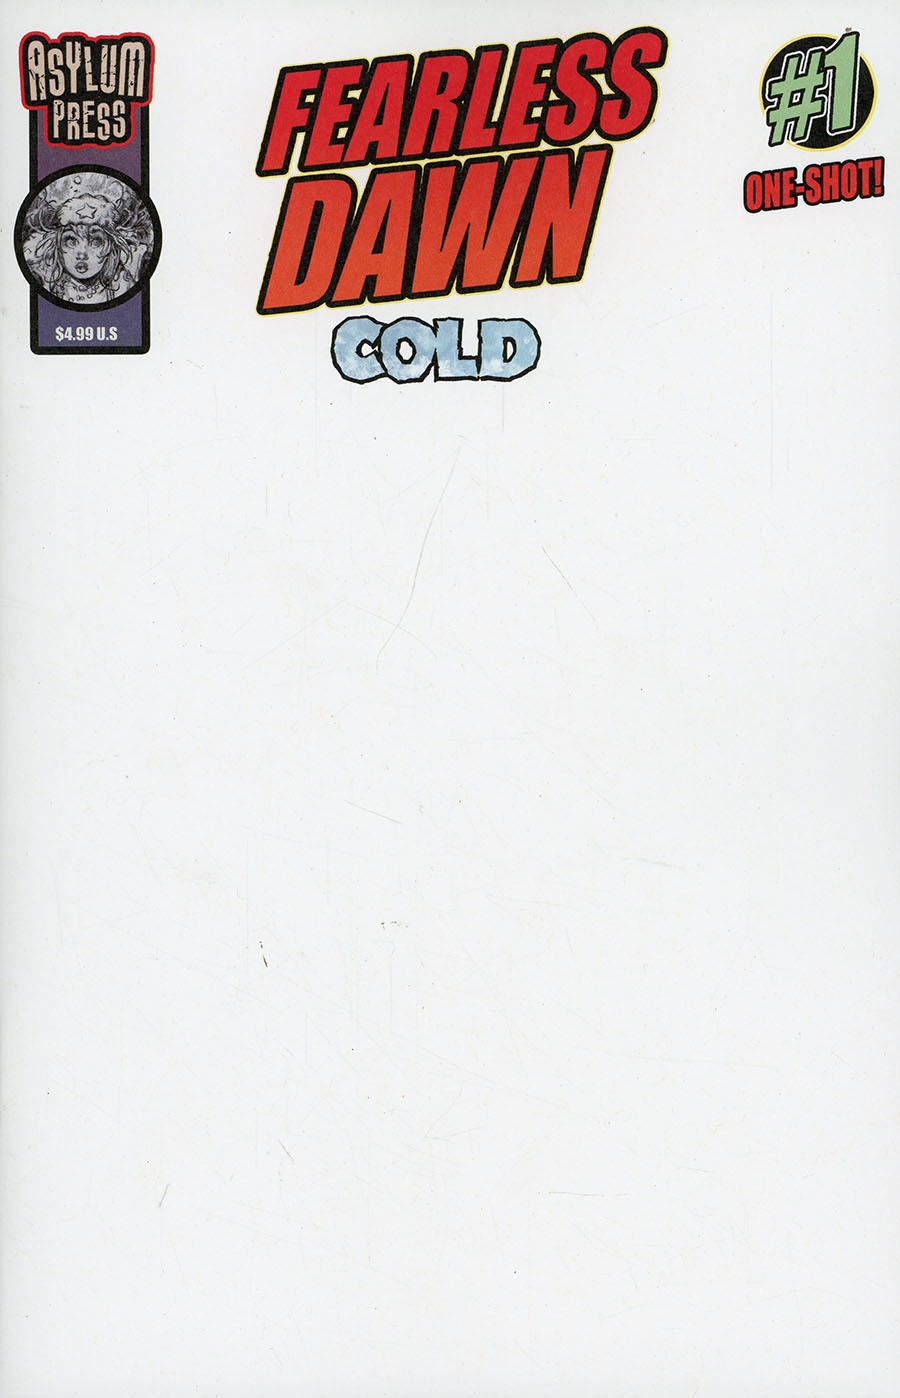 Fearless Dawn Cold #1 (One Shot) Cover C Variant Blank Cover